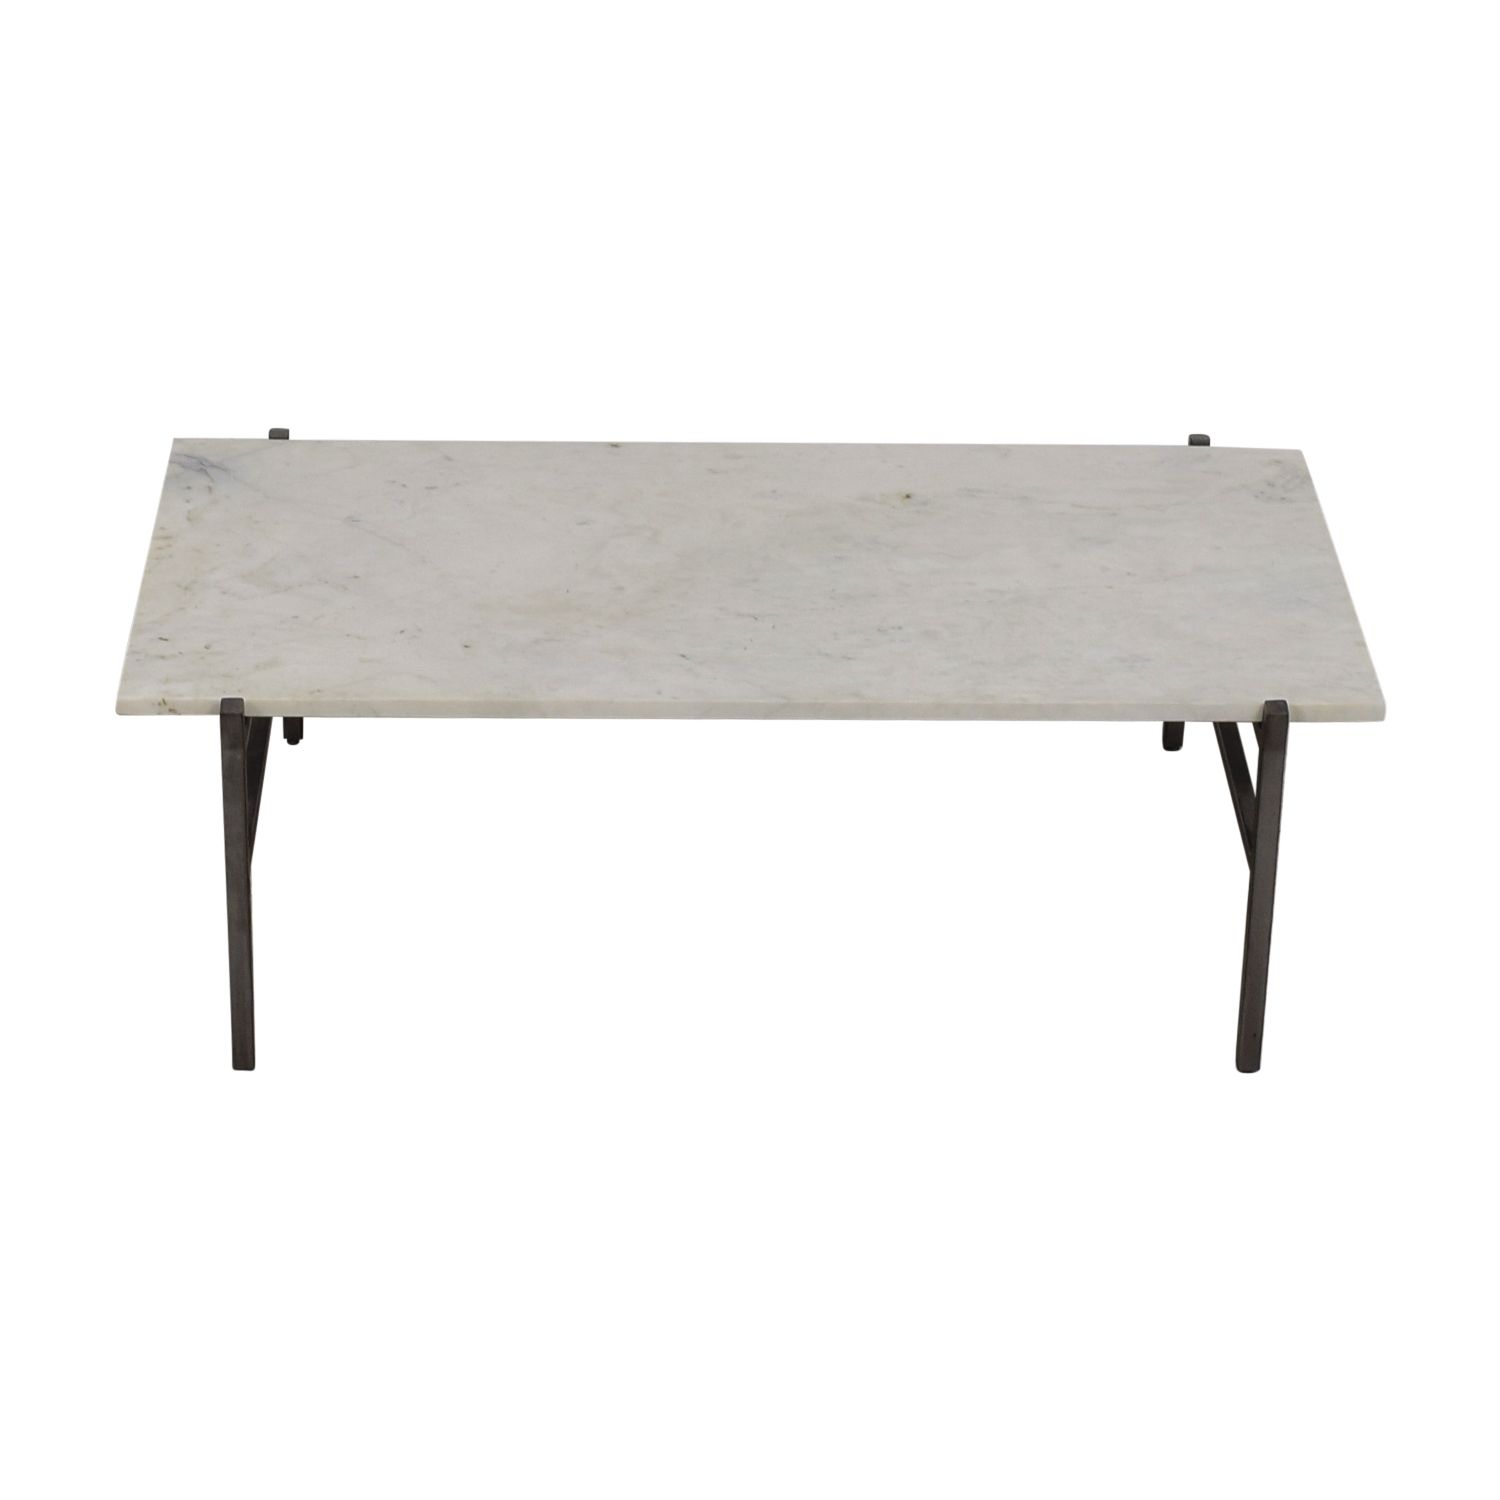 90% Off – Marble Top Coffee Table / Tables Regarding Large Slab Marble Coffee Tables With Antiqued Silver Base (View 5 of 30)